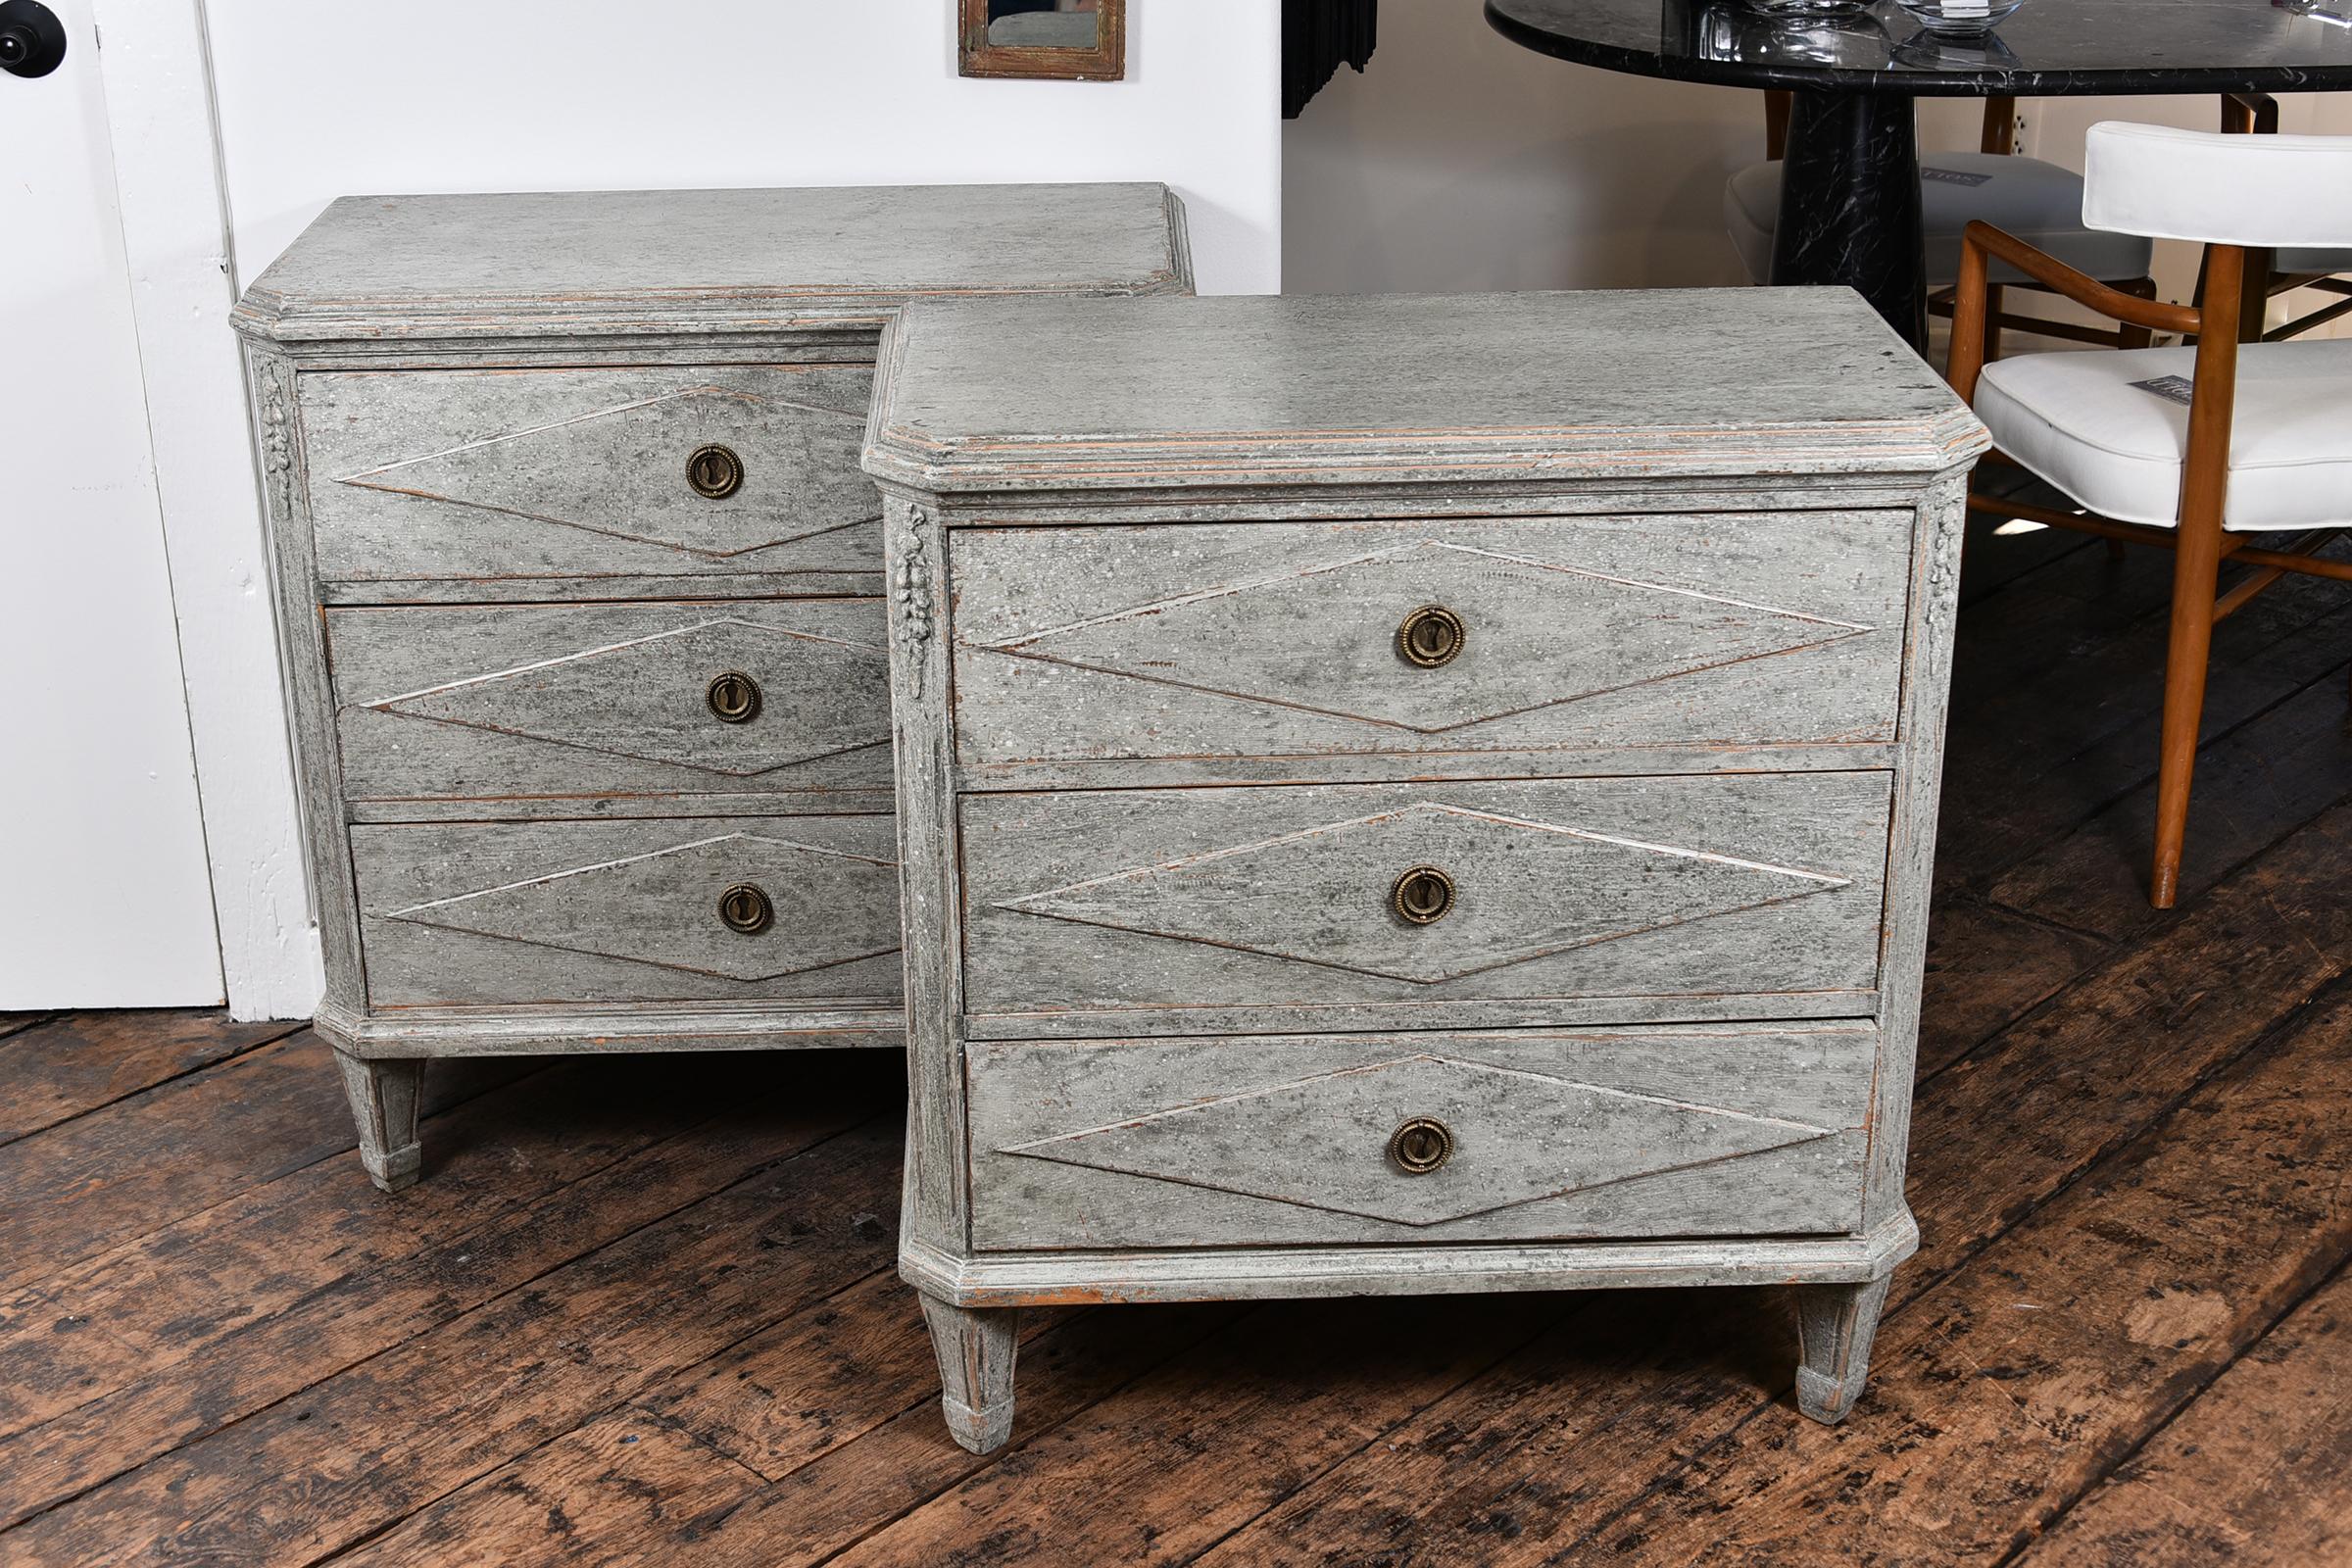 Pair of Swedish Gustavian chest circa 1810-1815. Scraped paint finish. Nice carving and details with a fluted foot.